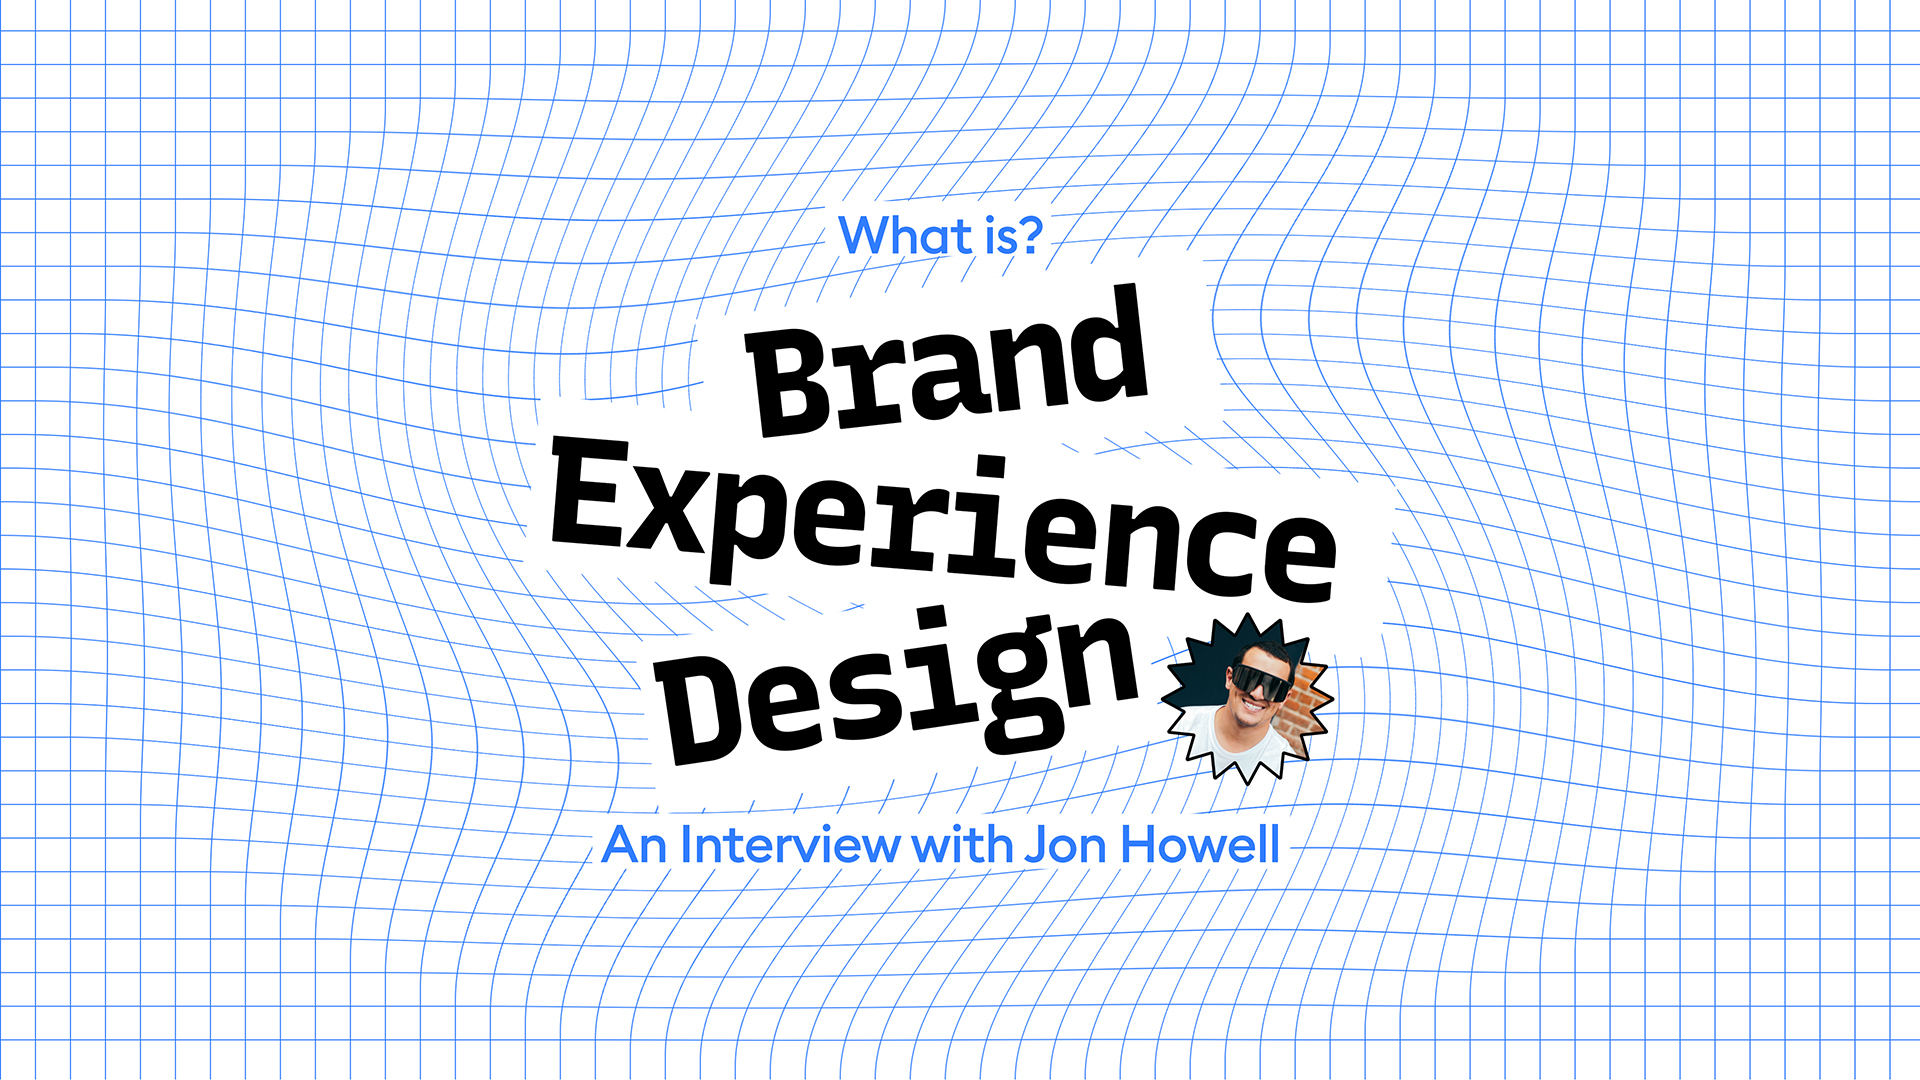 What is Brand Experience Design?